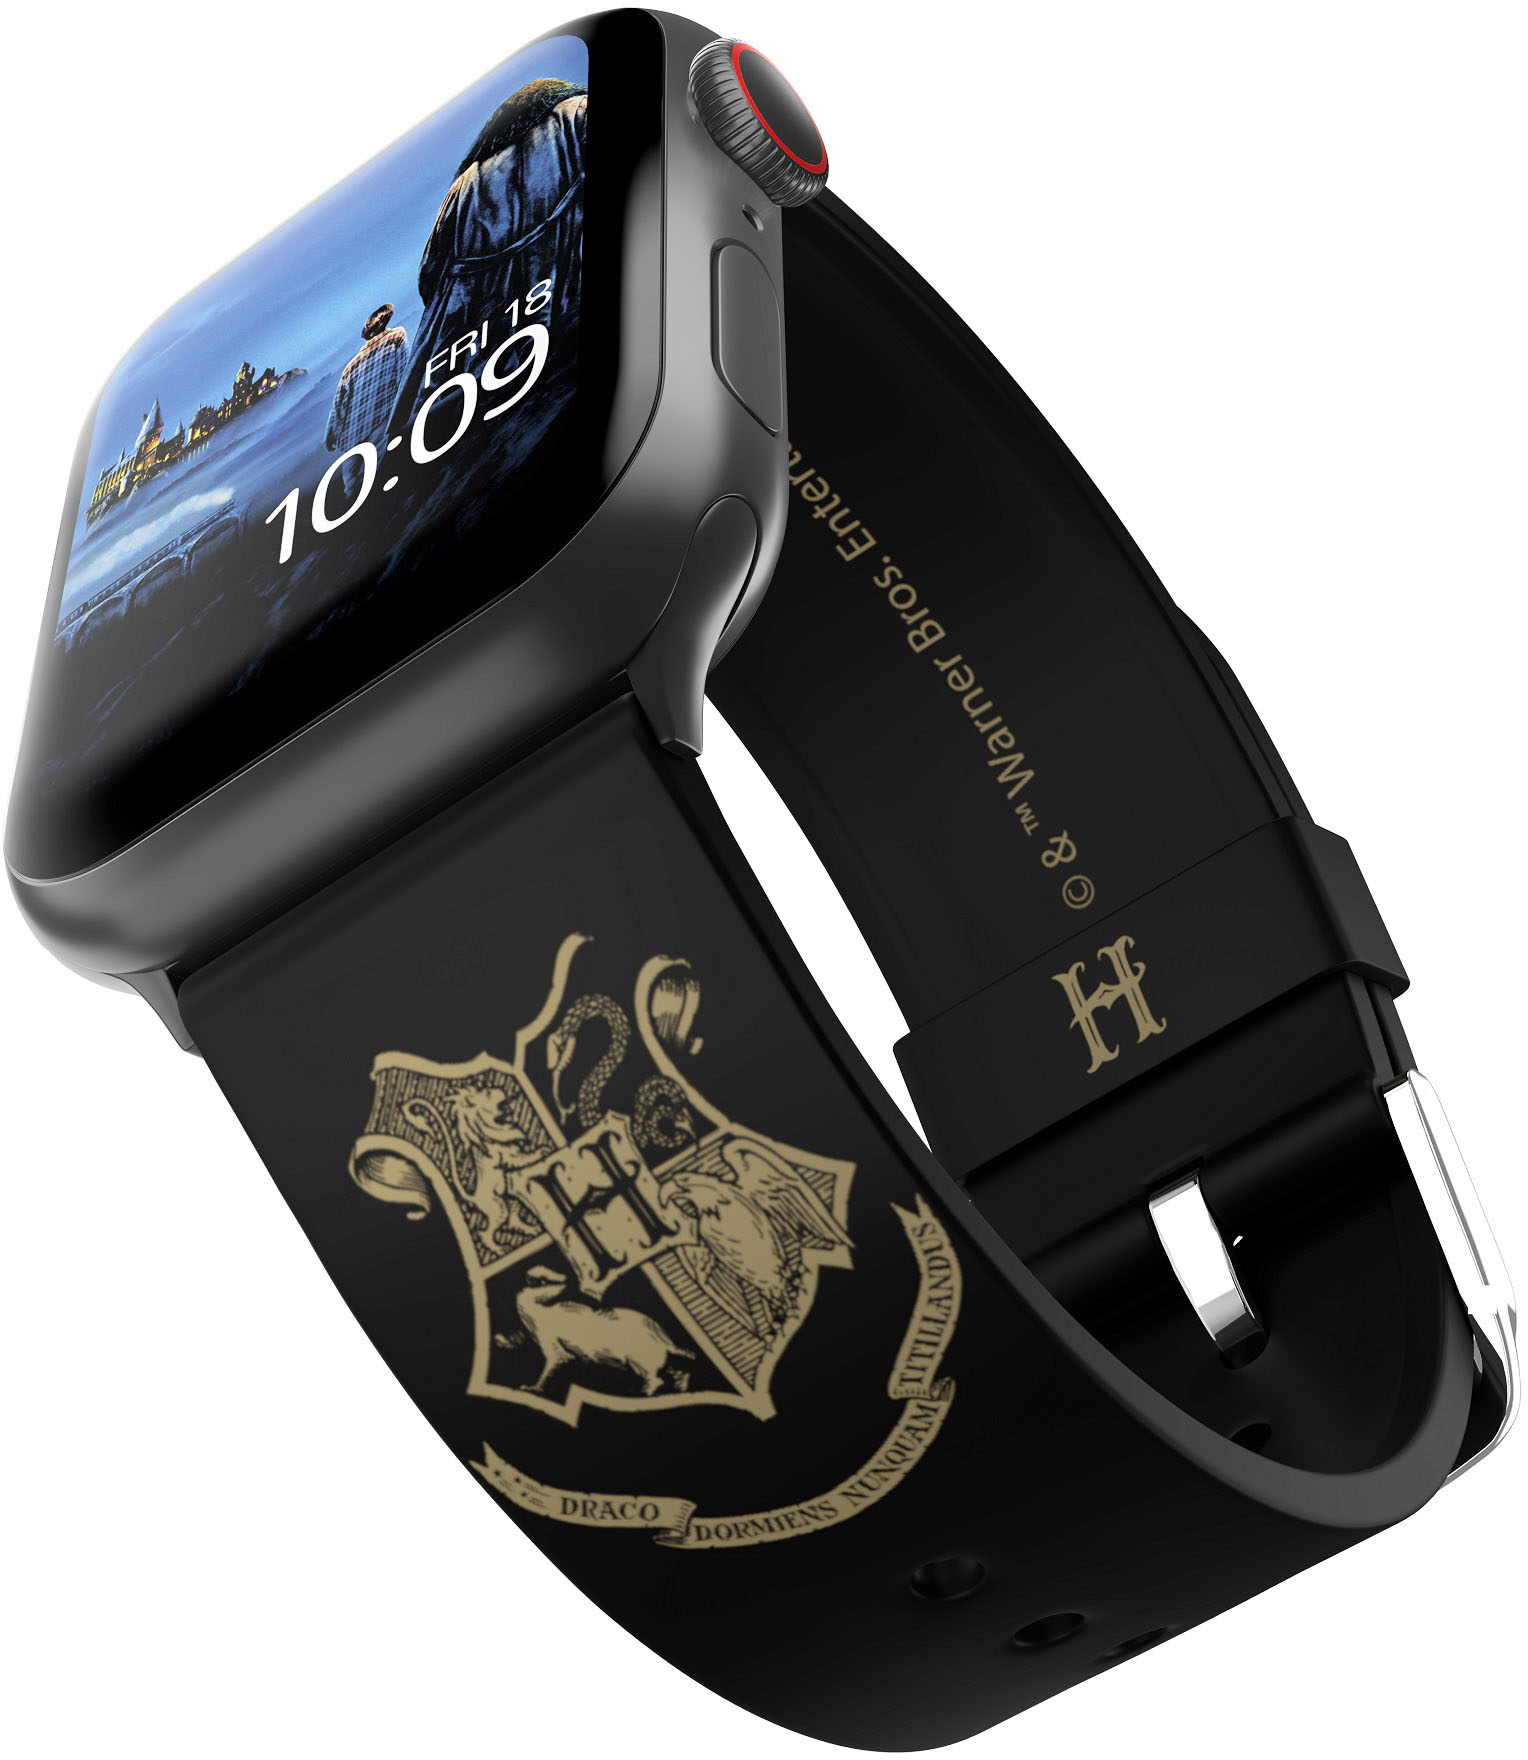 Angle View: MobyFox - Harry Potter - Hogwarts Black&Gold Smartwatch Band - Compatible with Apple Watch - Fits 38mm, 40mm, 42mm and 44mm